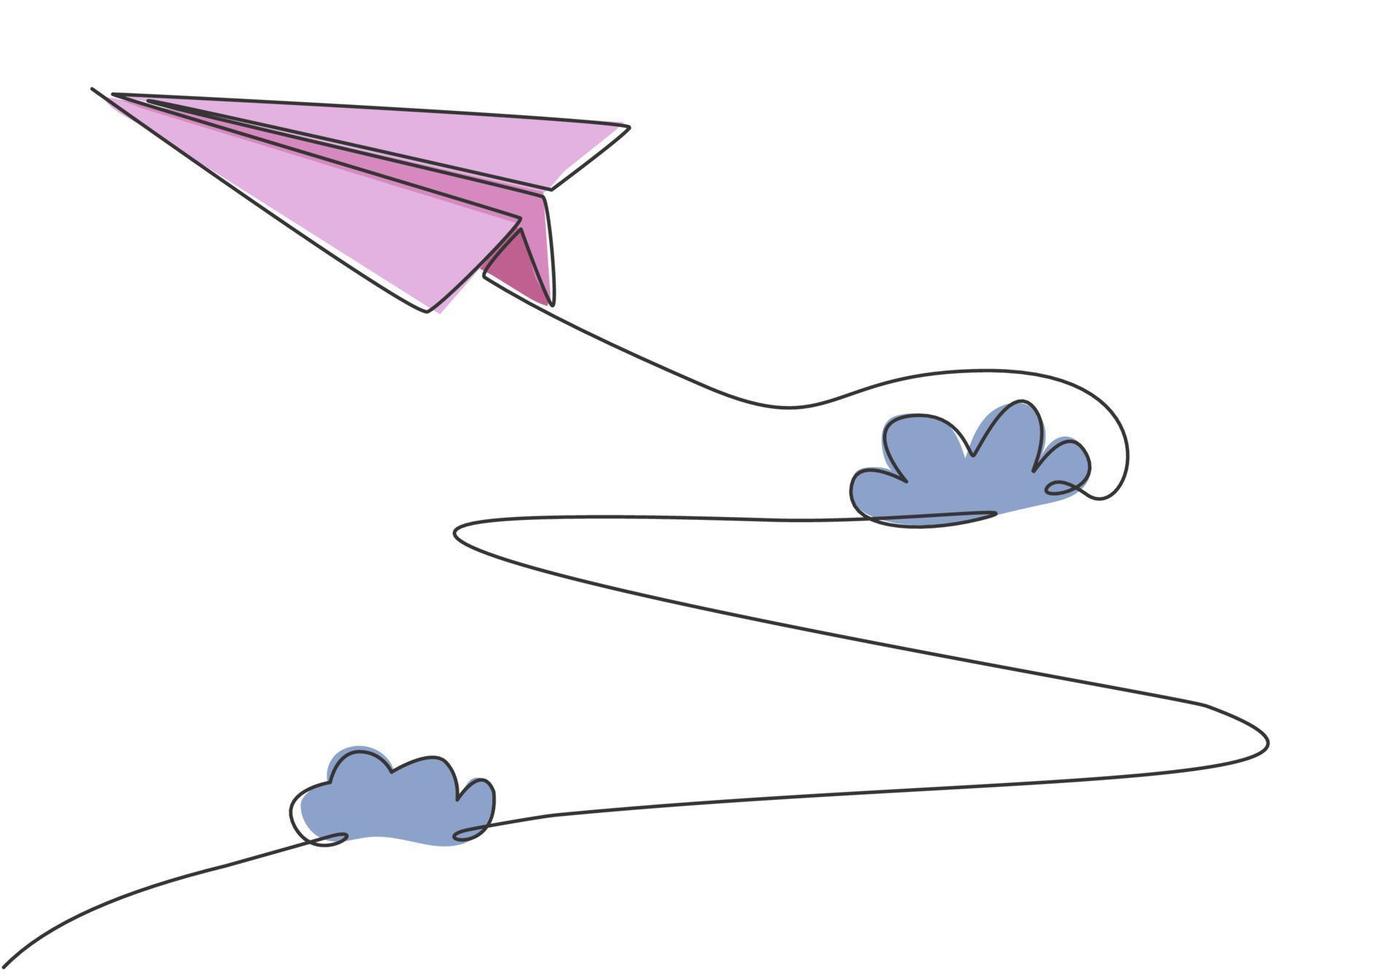 Single continuous line drawing of paper plane flying high through the clouds on white background. Paper origami kids toy. Minimalism concept dynamic one line draw graphic design vector illustration